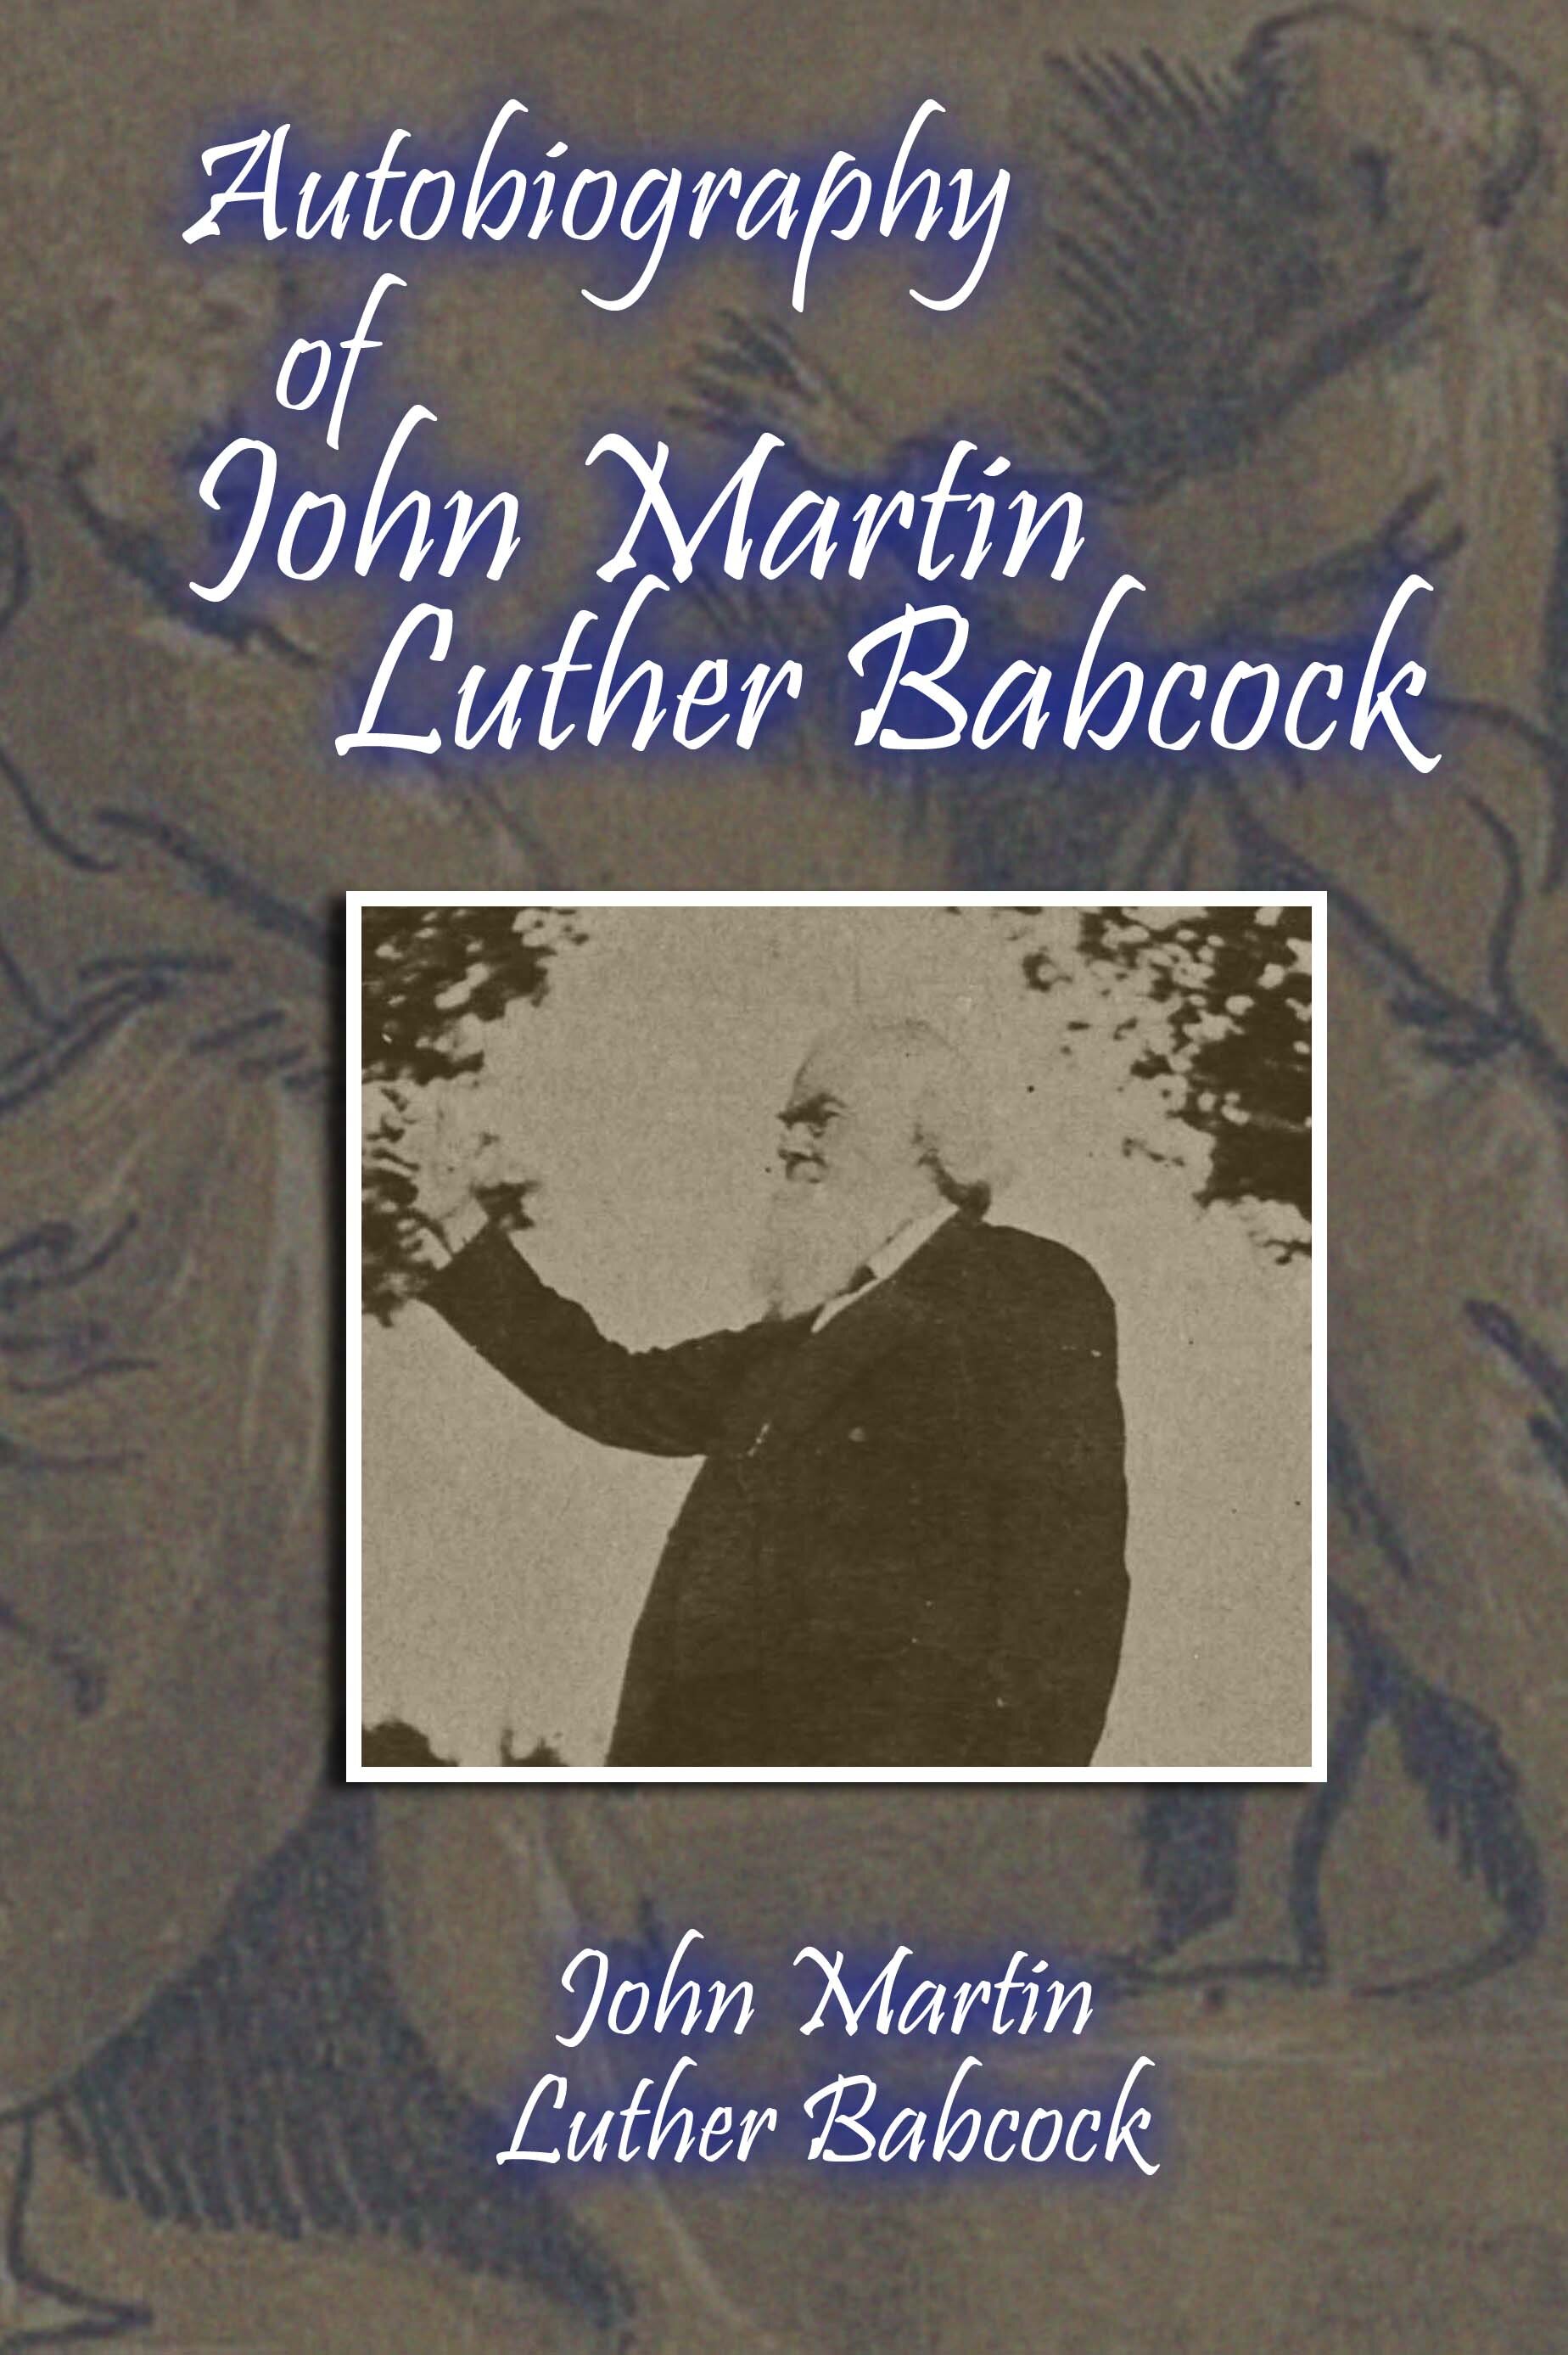 Autobiography of John Martin Luther Babcock